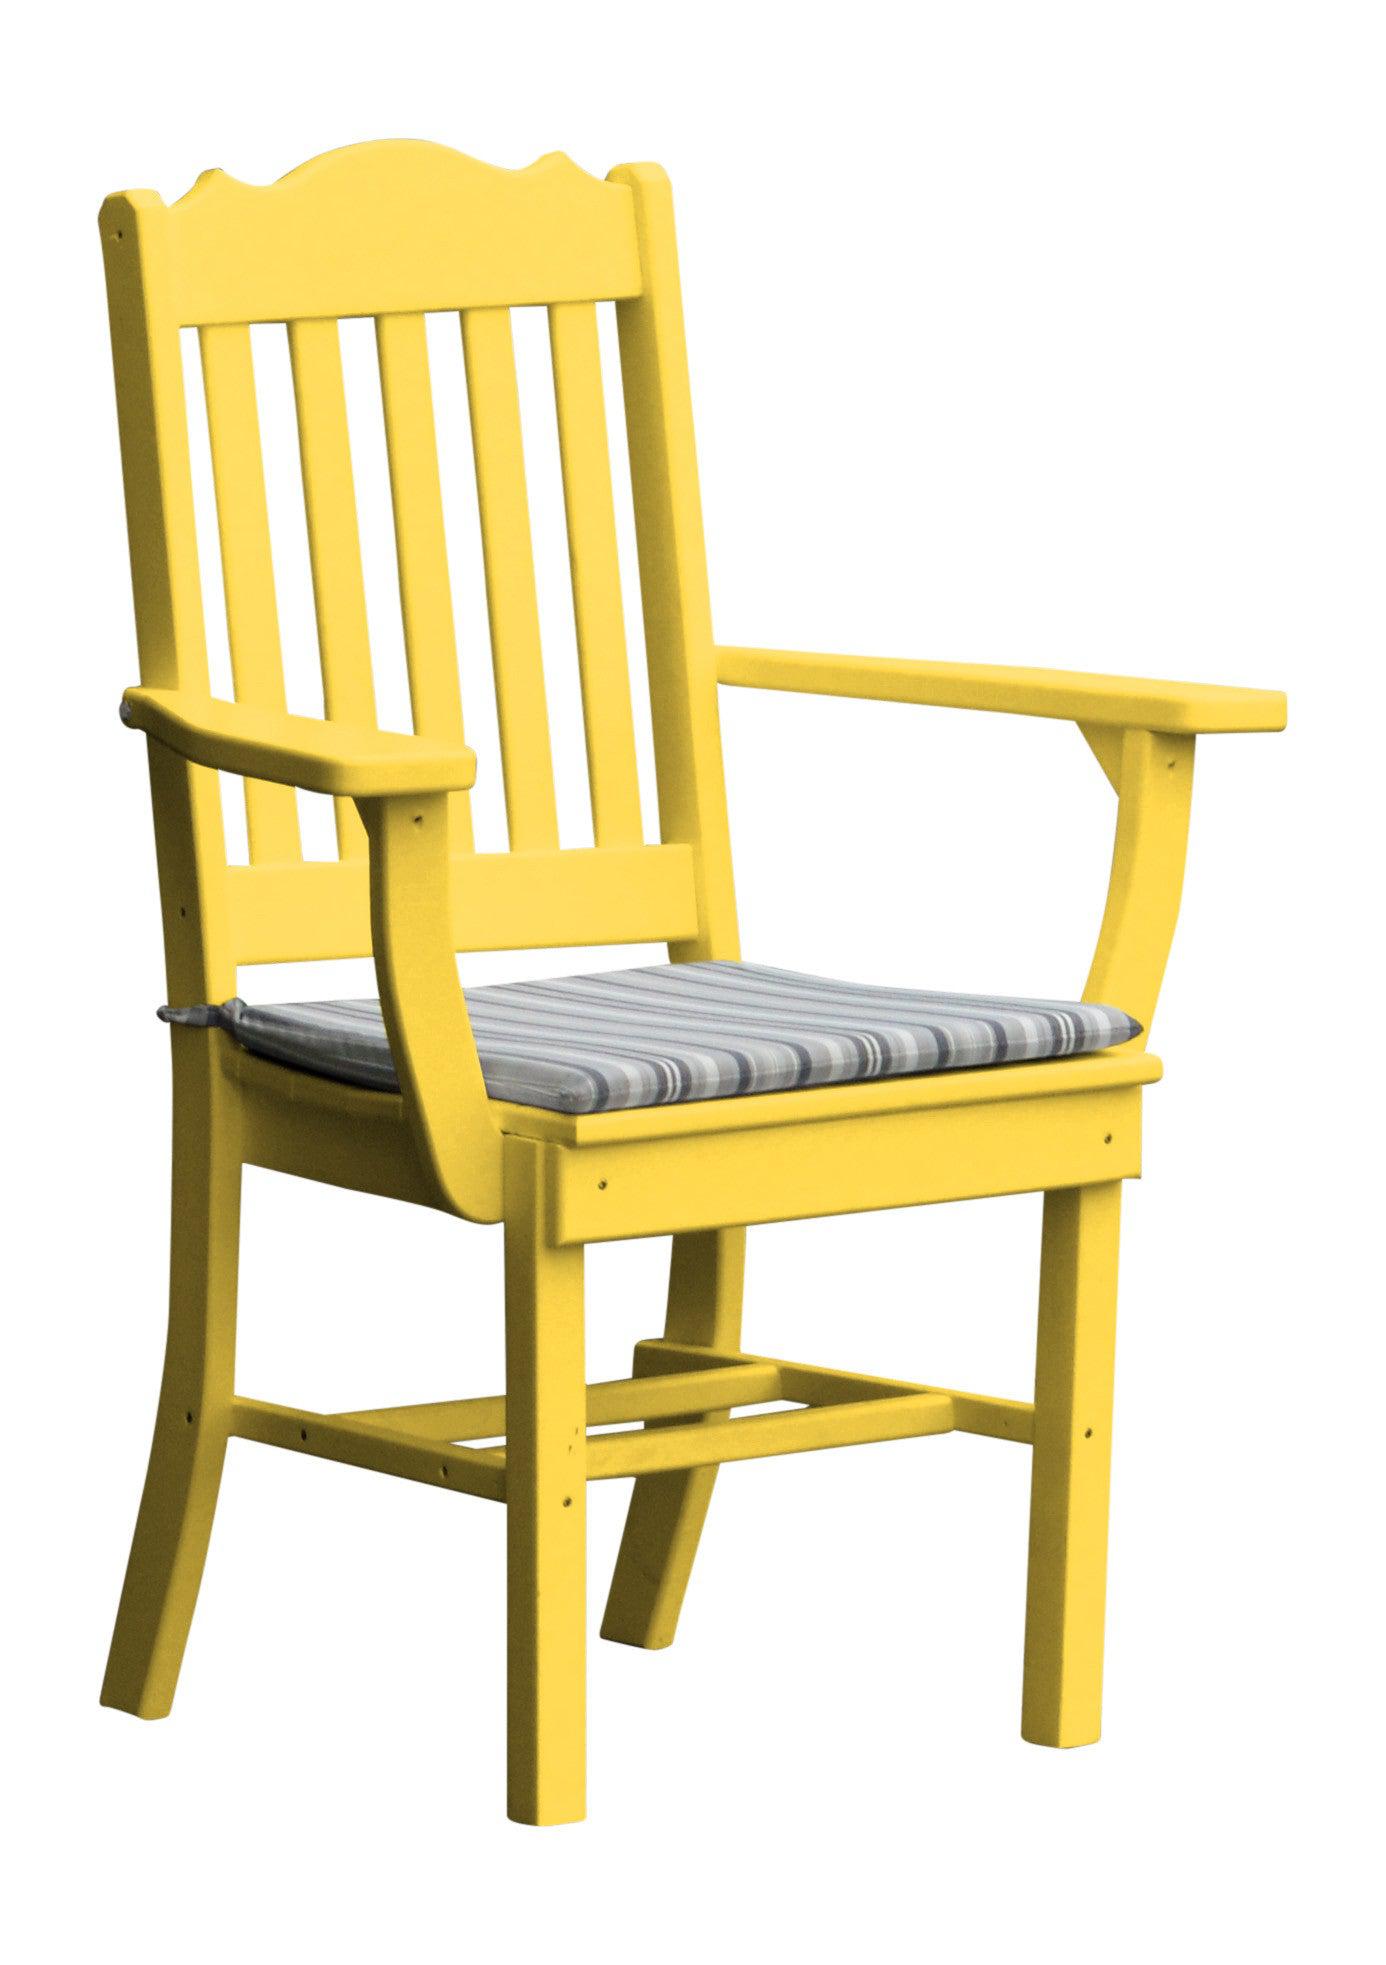 A&L Furniture Company Recycled Plastic Royal Dining Chair w/ Arms - Lemon Yellow